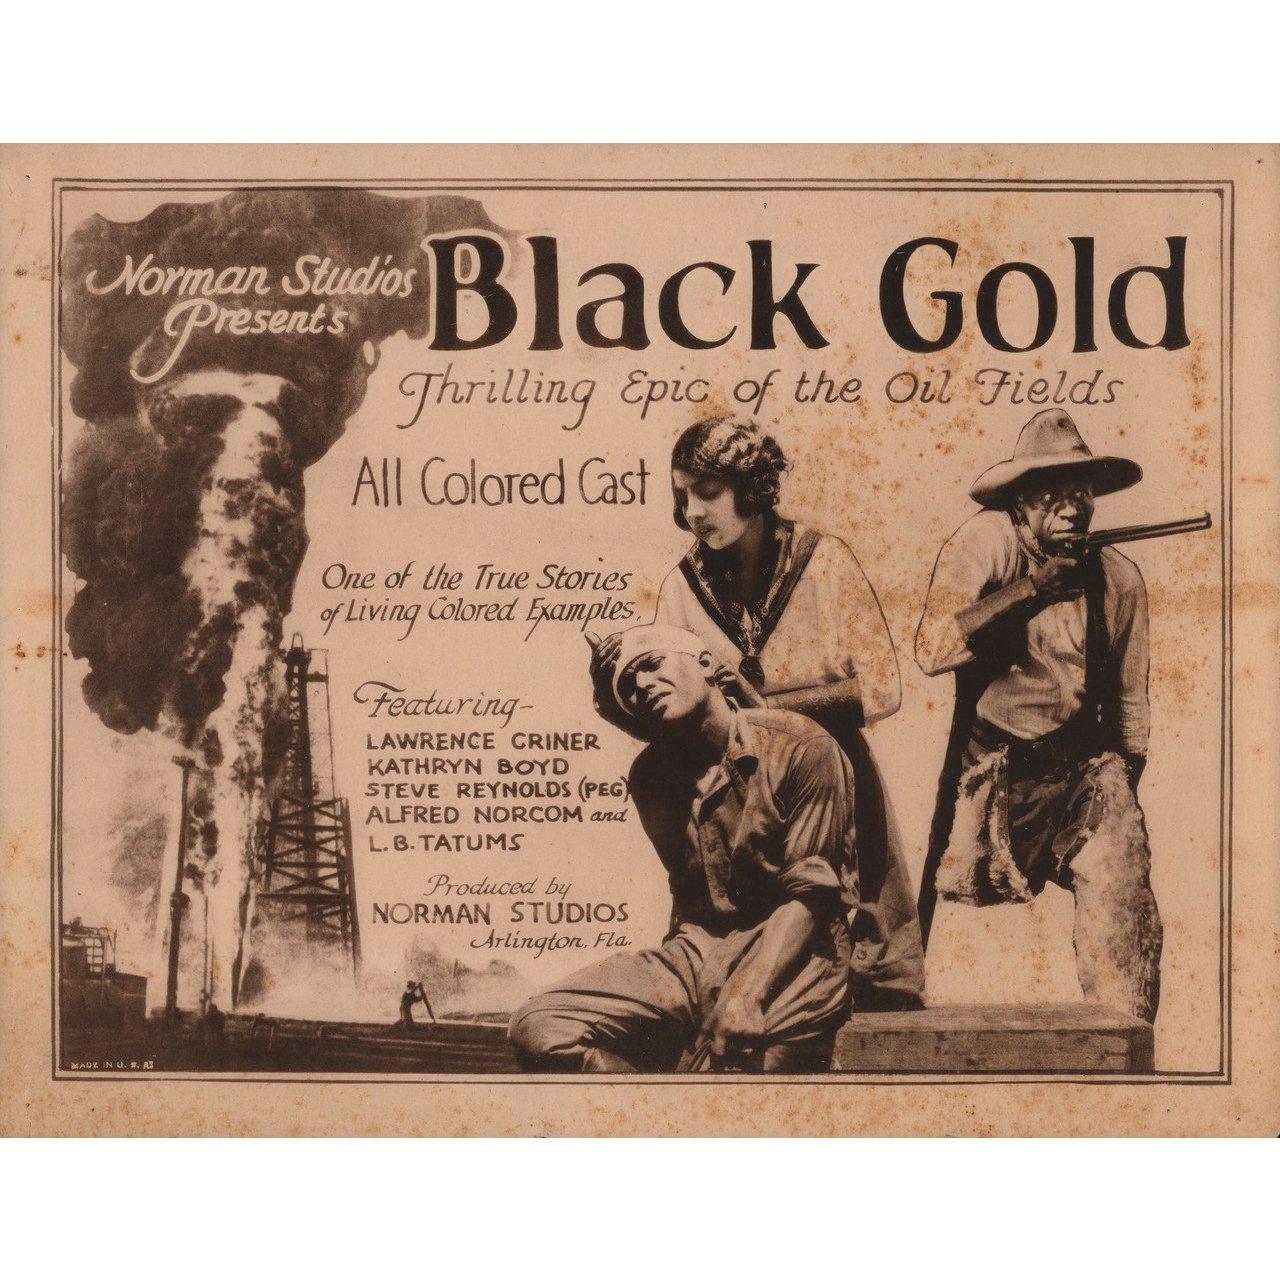 Original 1928 U.S. title card for the film Black Gold directed by Richard E. Norman with Laurence Criner / Kathryn Boyd / Steve Reynolds / Alfred Norcom. Fair-good condition. Please note: the size is stated in inches and the actual size can vary by